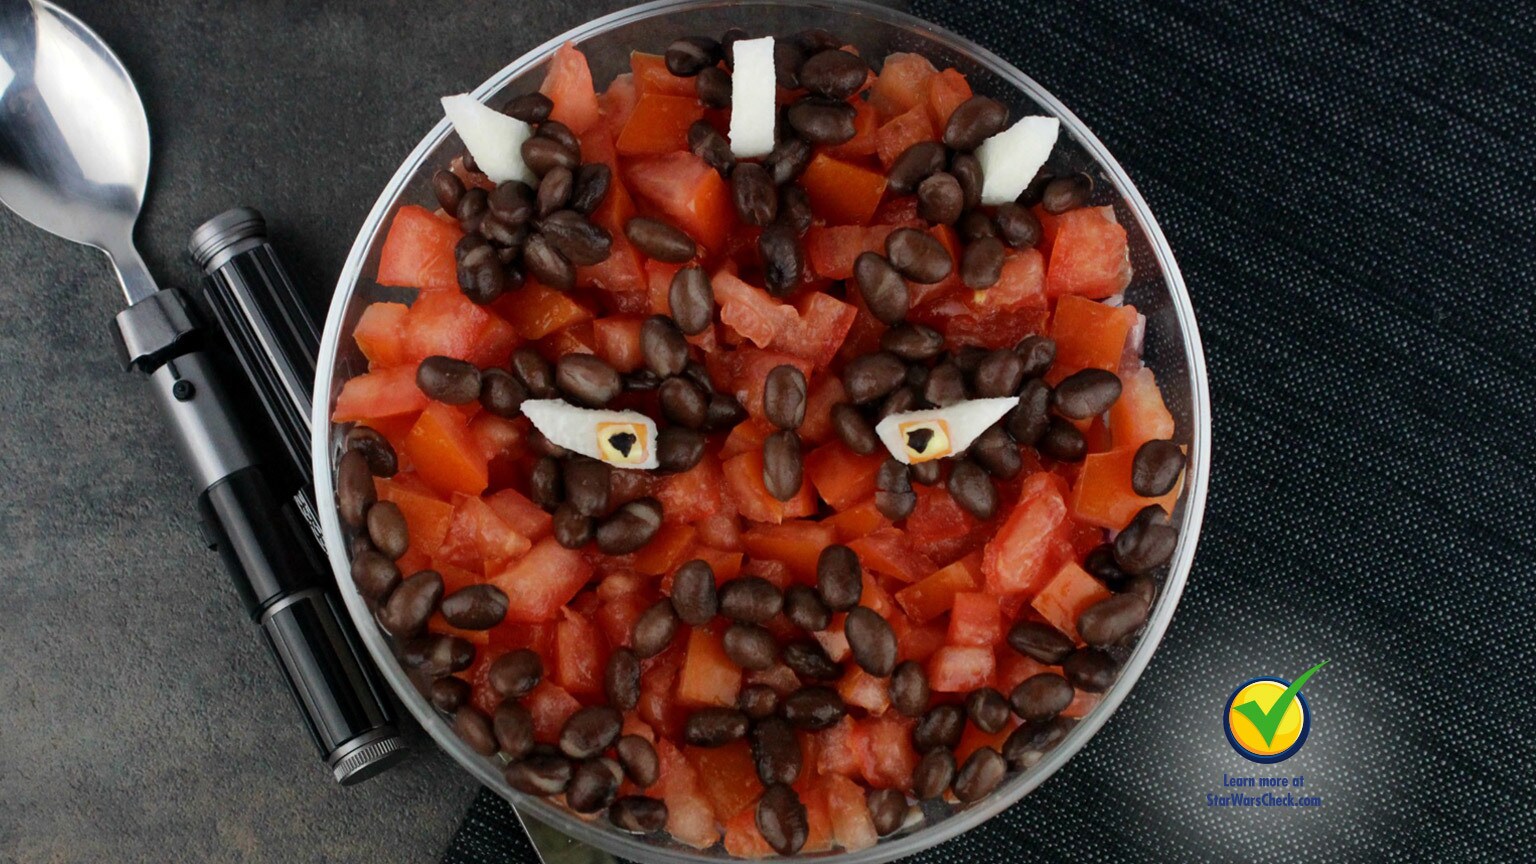 Enjoy a Healthy Dose of the Dark Side With This Darth Maul Quinoa Salad